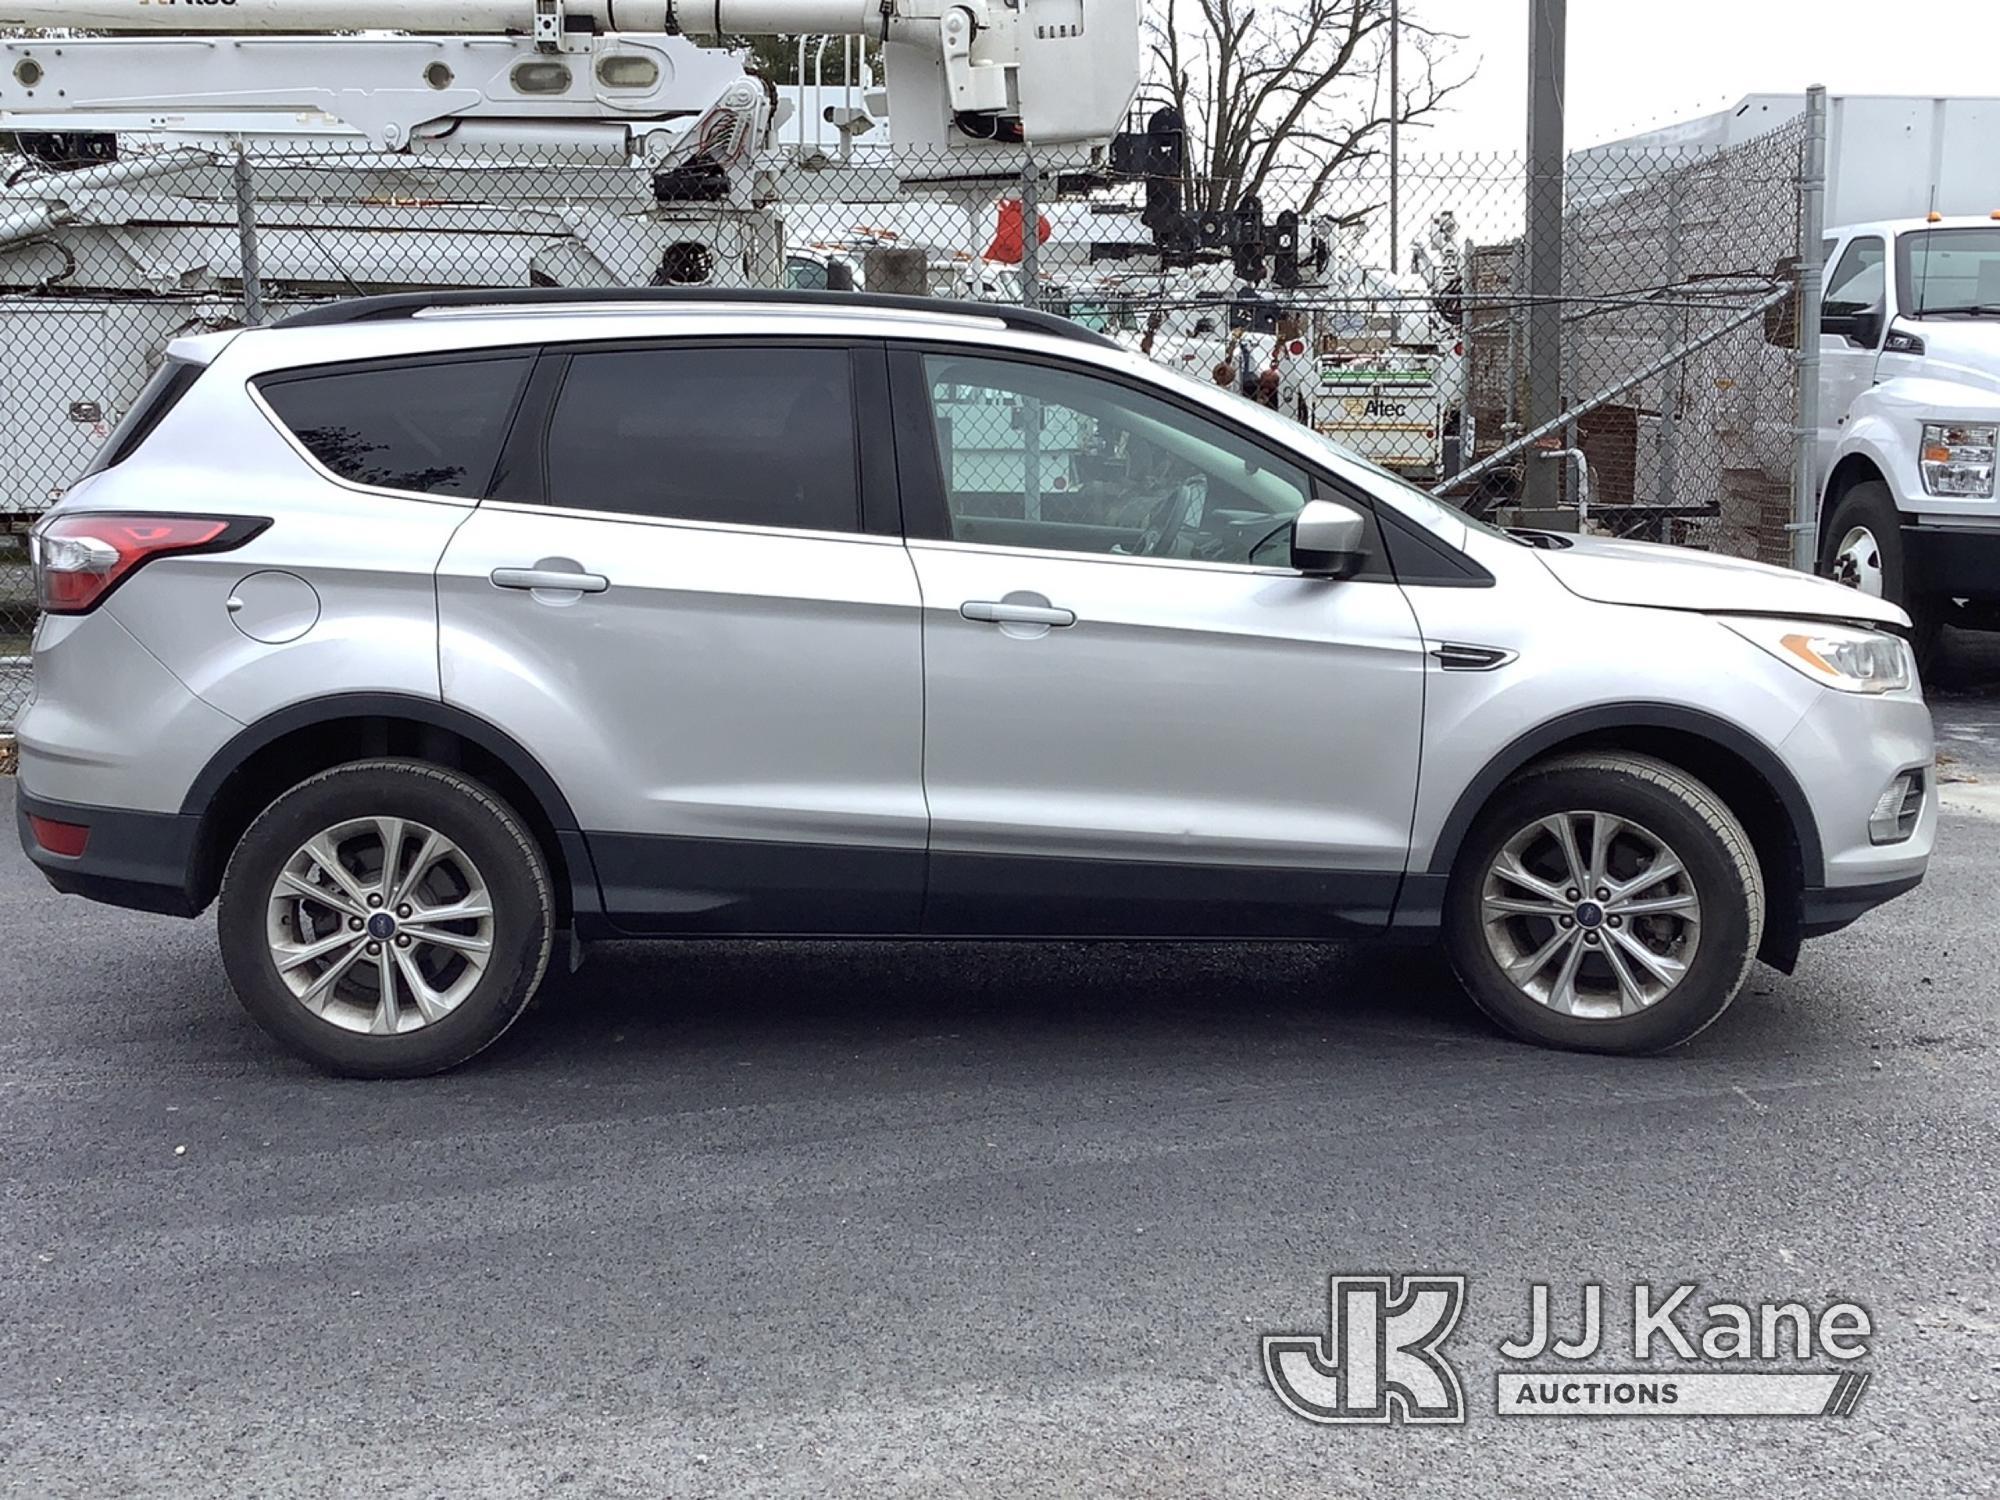 (Frederick, MD) 2017 Ford Escape 4x4 4-Door Sport Utility Vehicle Runs & Moves, Rust & Body Damage